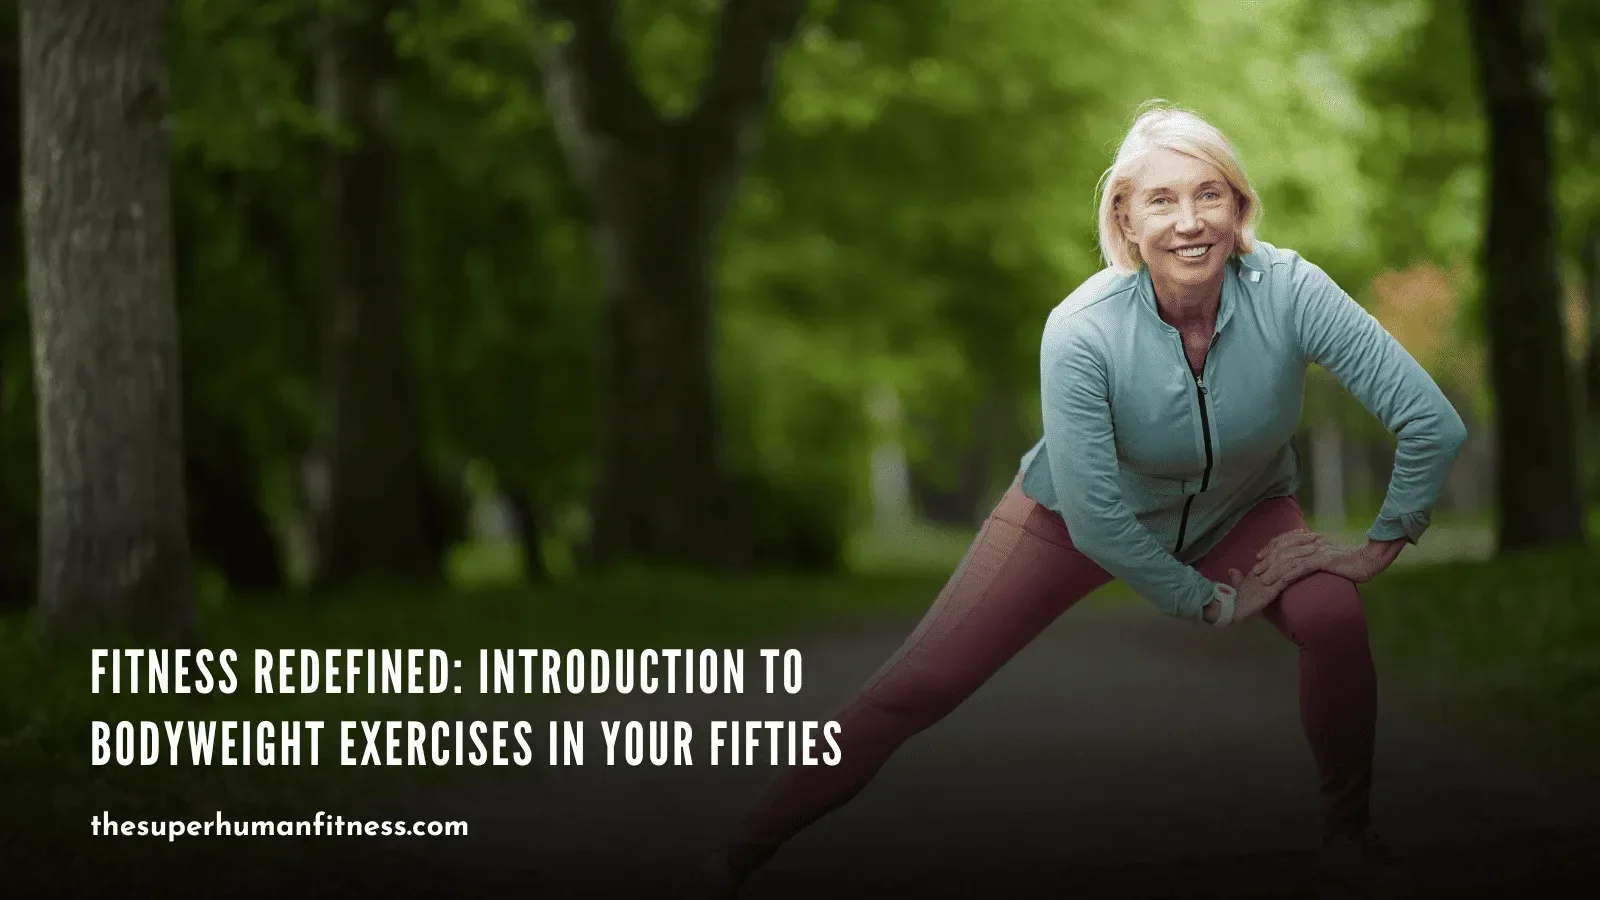 Introduction to Bodyweight Exercises in Your Fifties